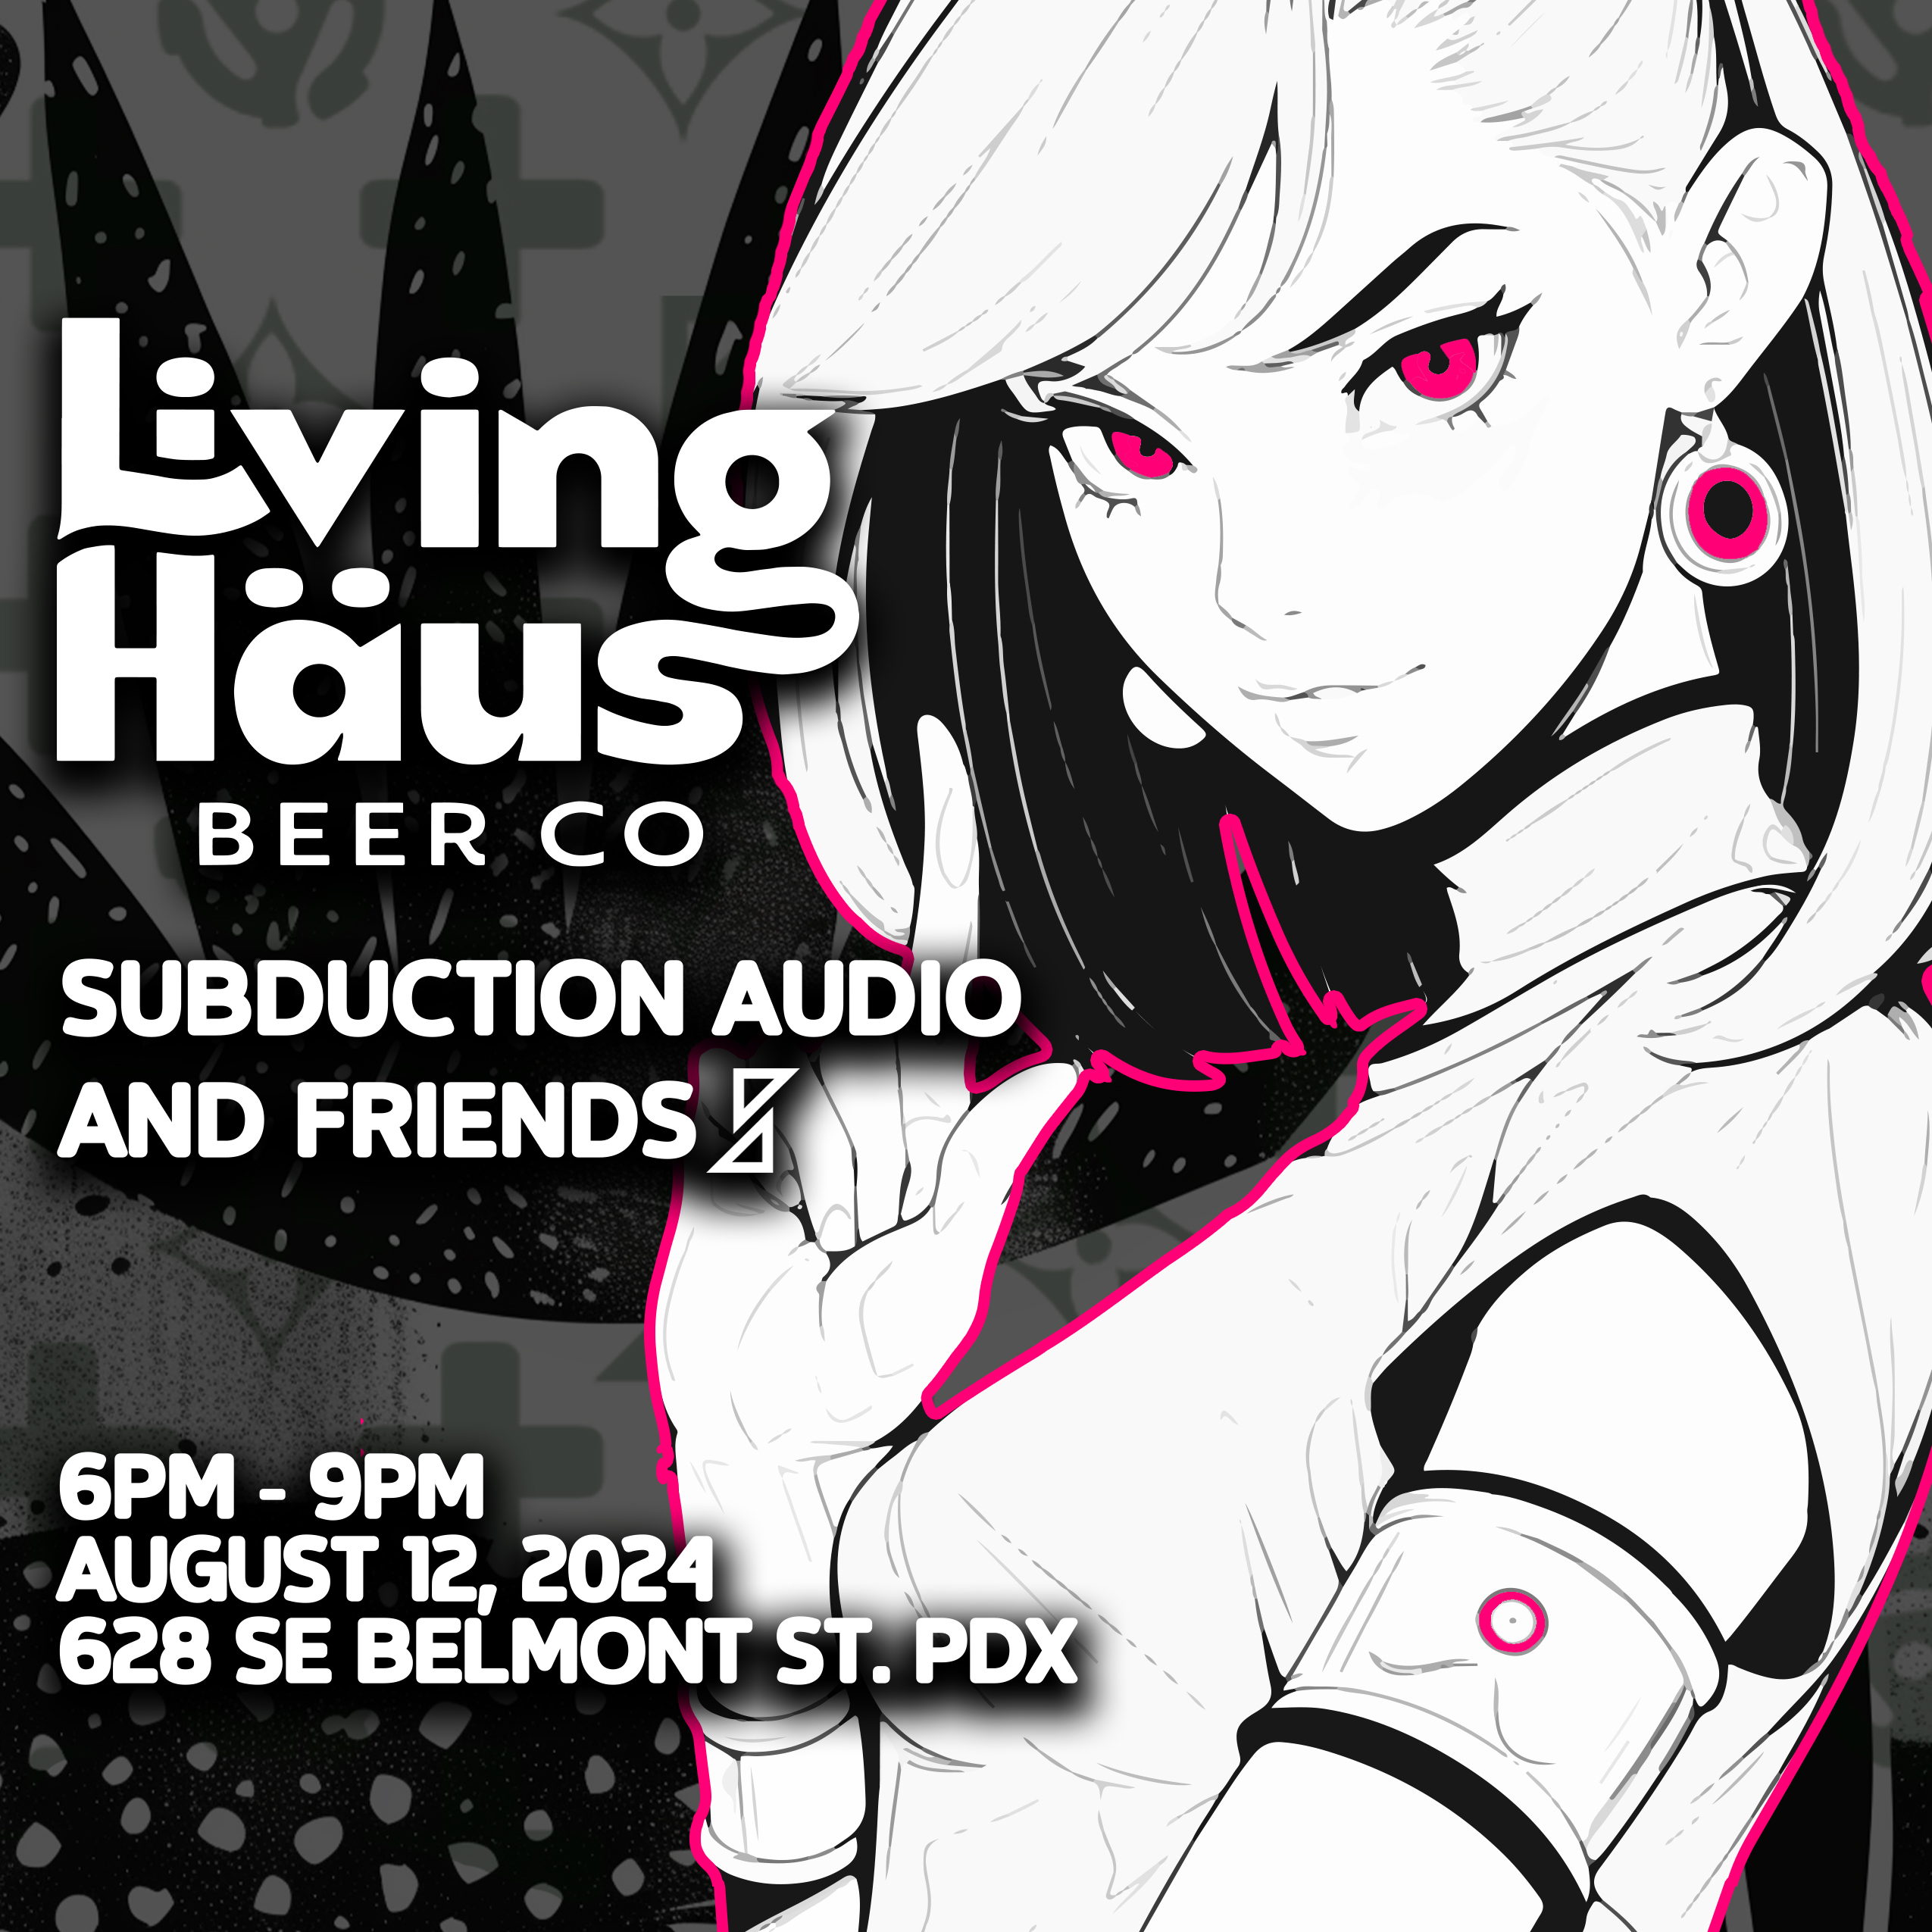 Subduction Audio and Friends 24